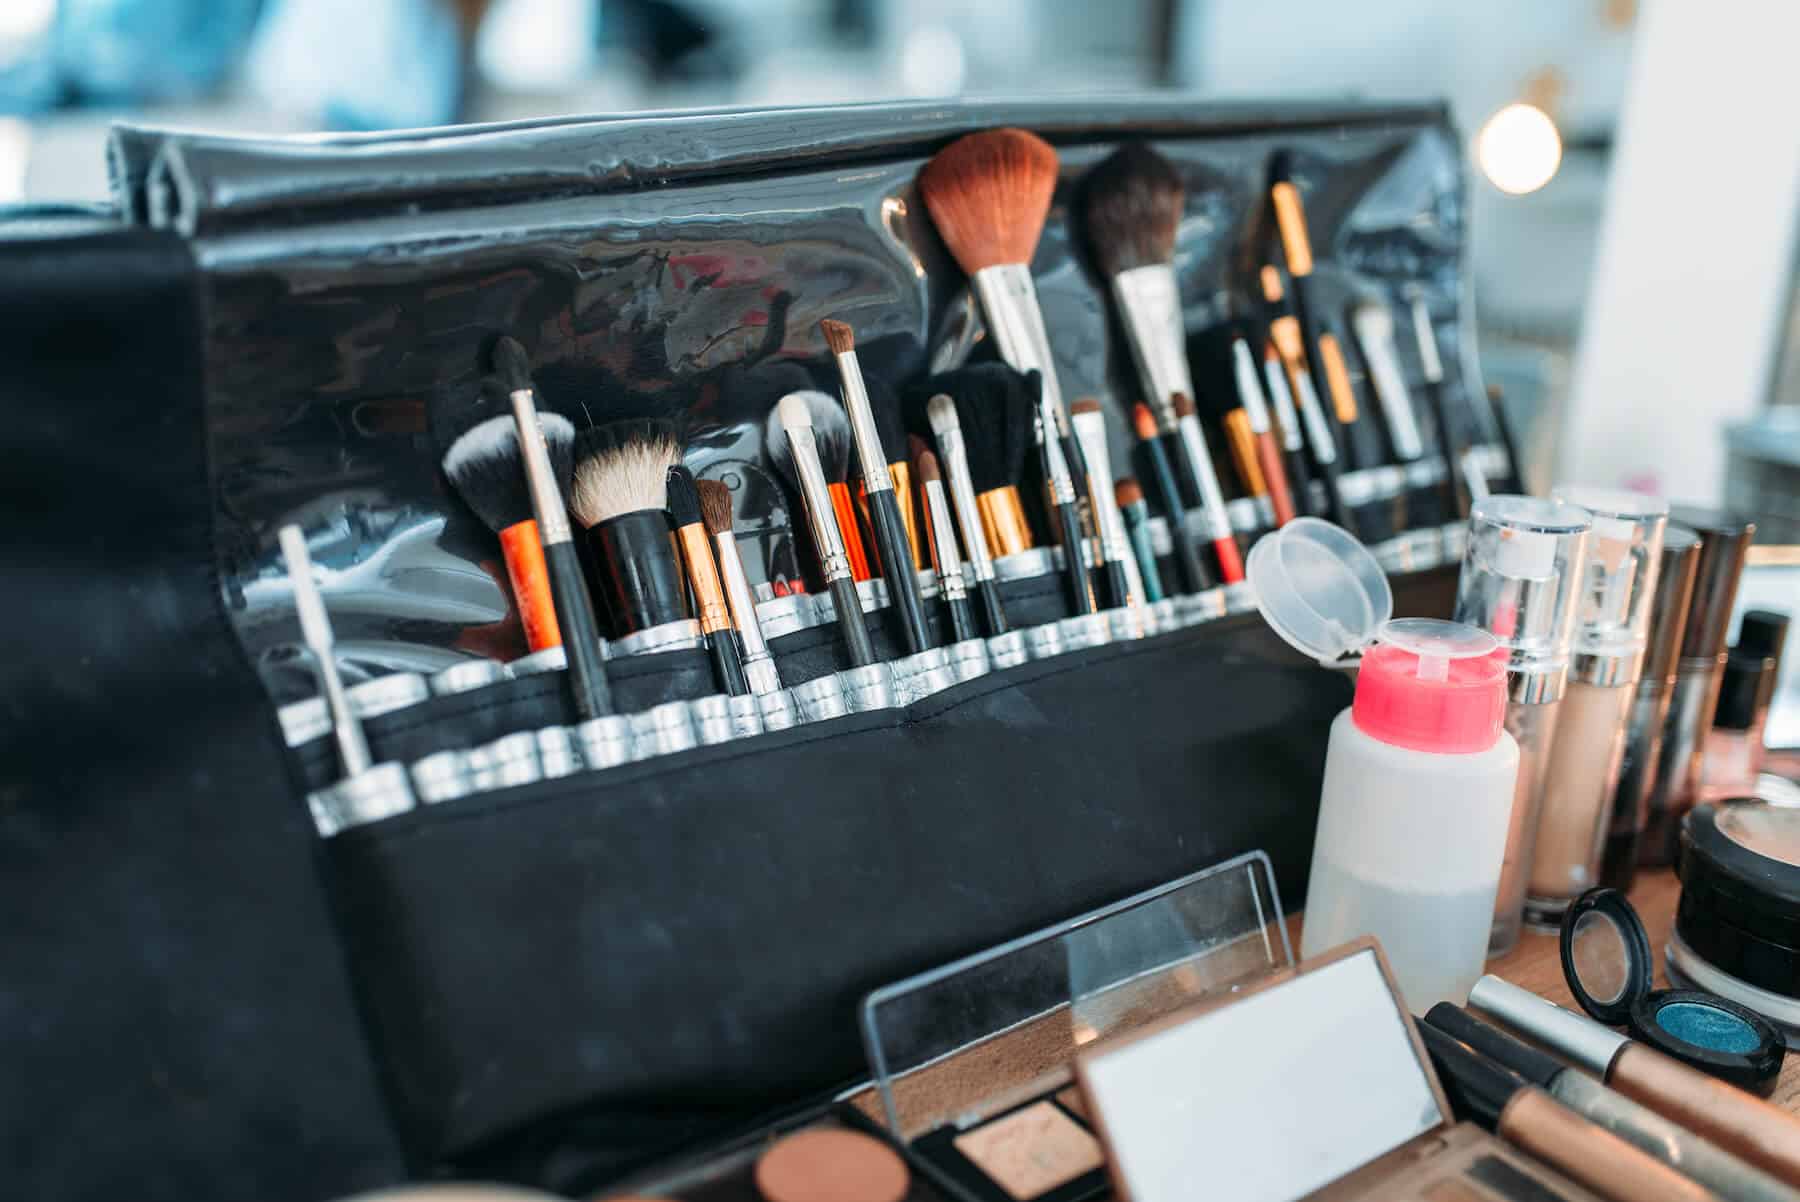 How To Build An MUA Kit According To Makeup Artists - Beauty Bay Edited